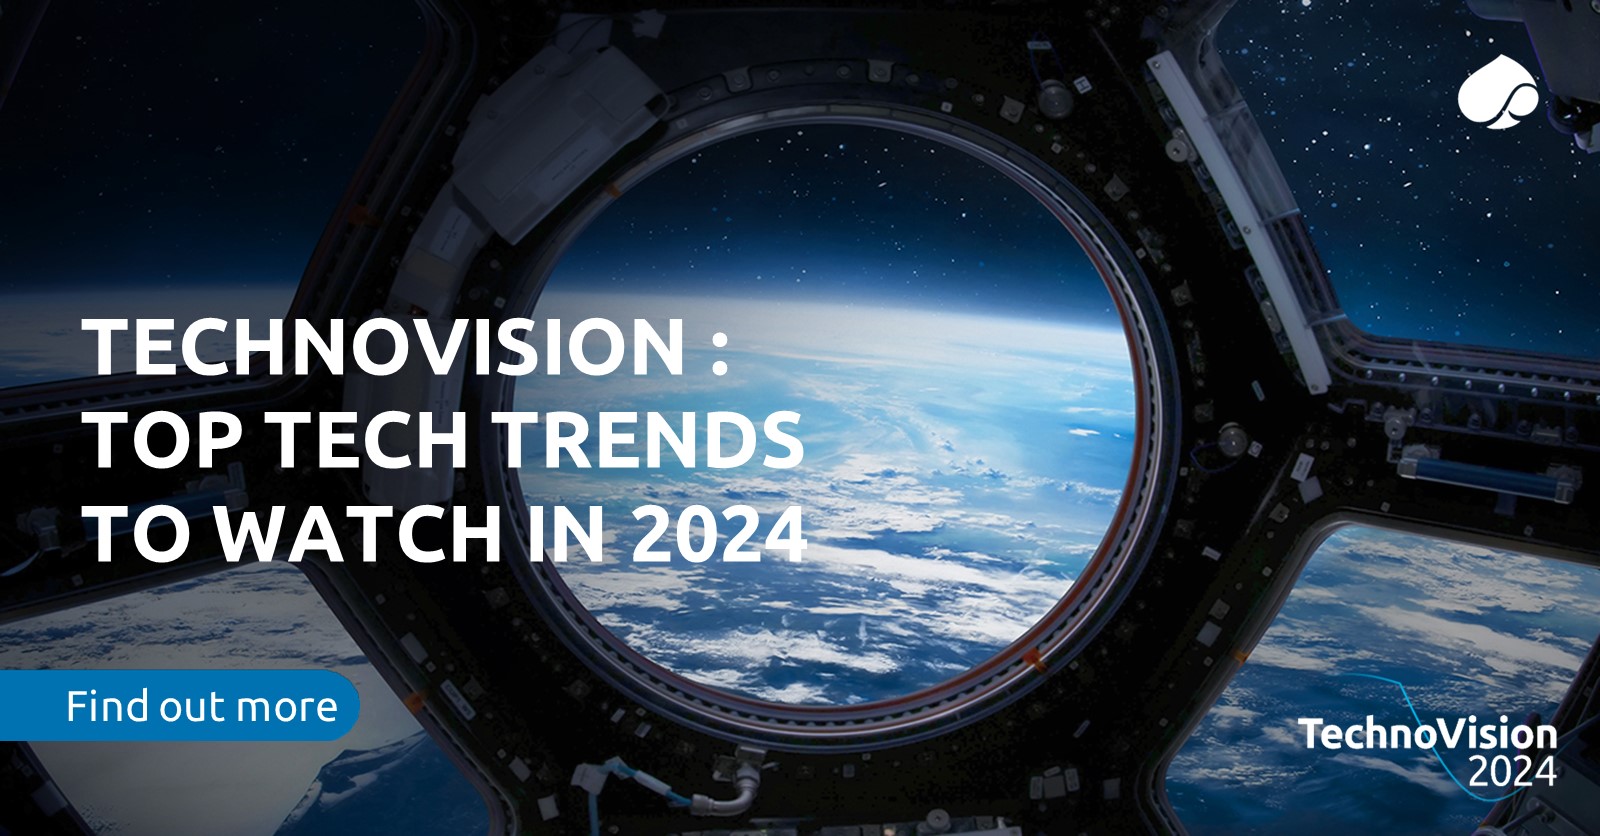 22 New Technology Trends for 2024: New Tech Horizons